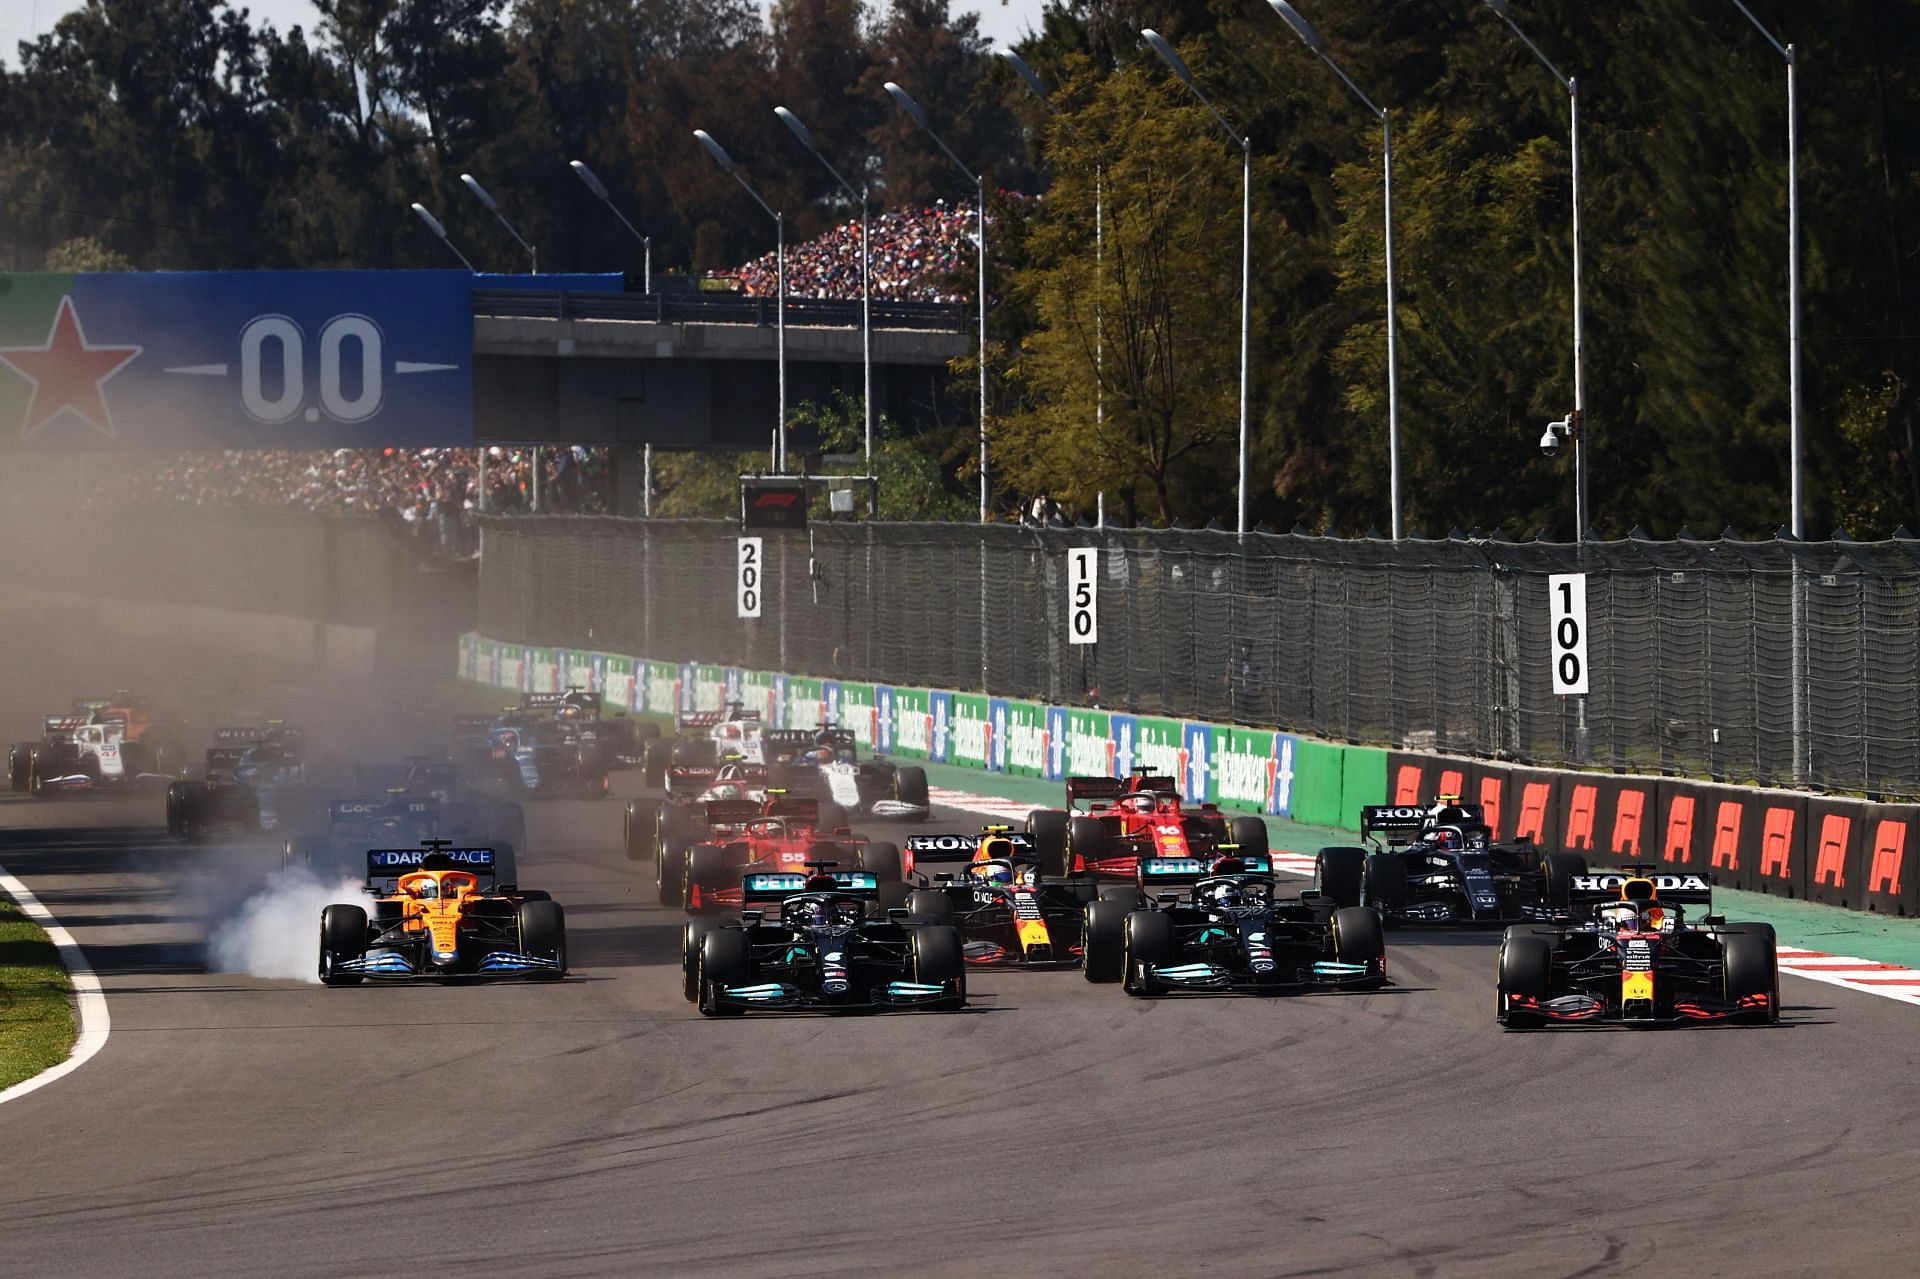 Max Verstappen grabs the lead at the start of the 2021 Mexican GP. (Photo by Mark Thompson/Getty Images)